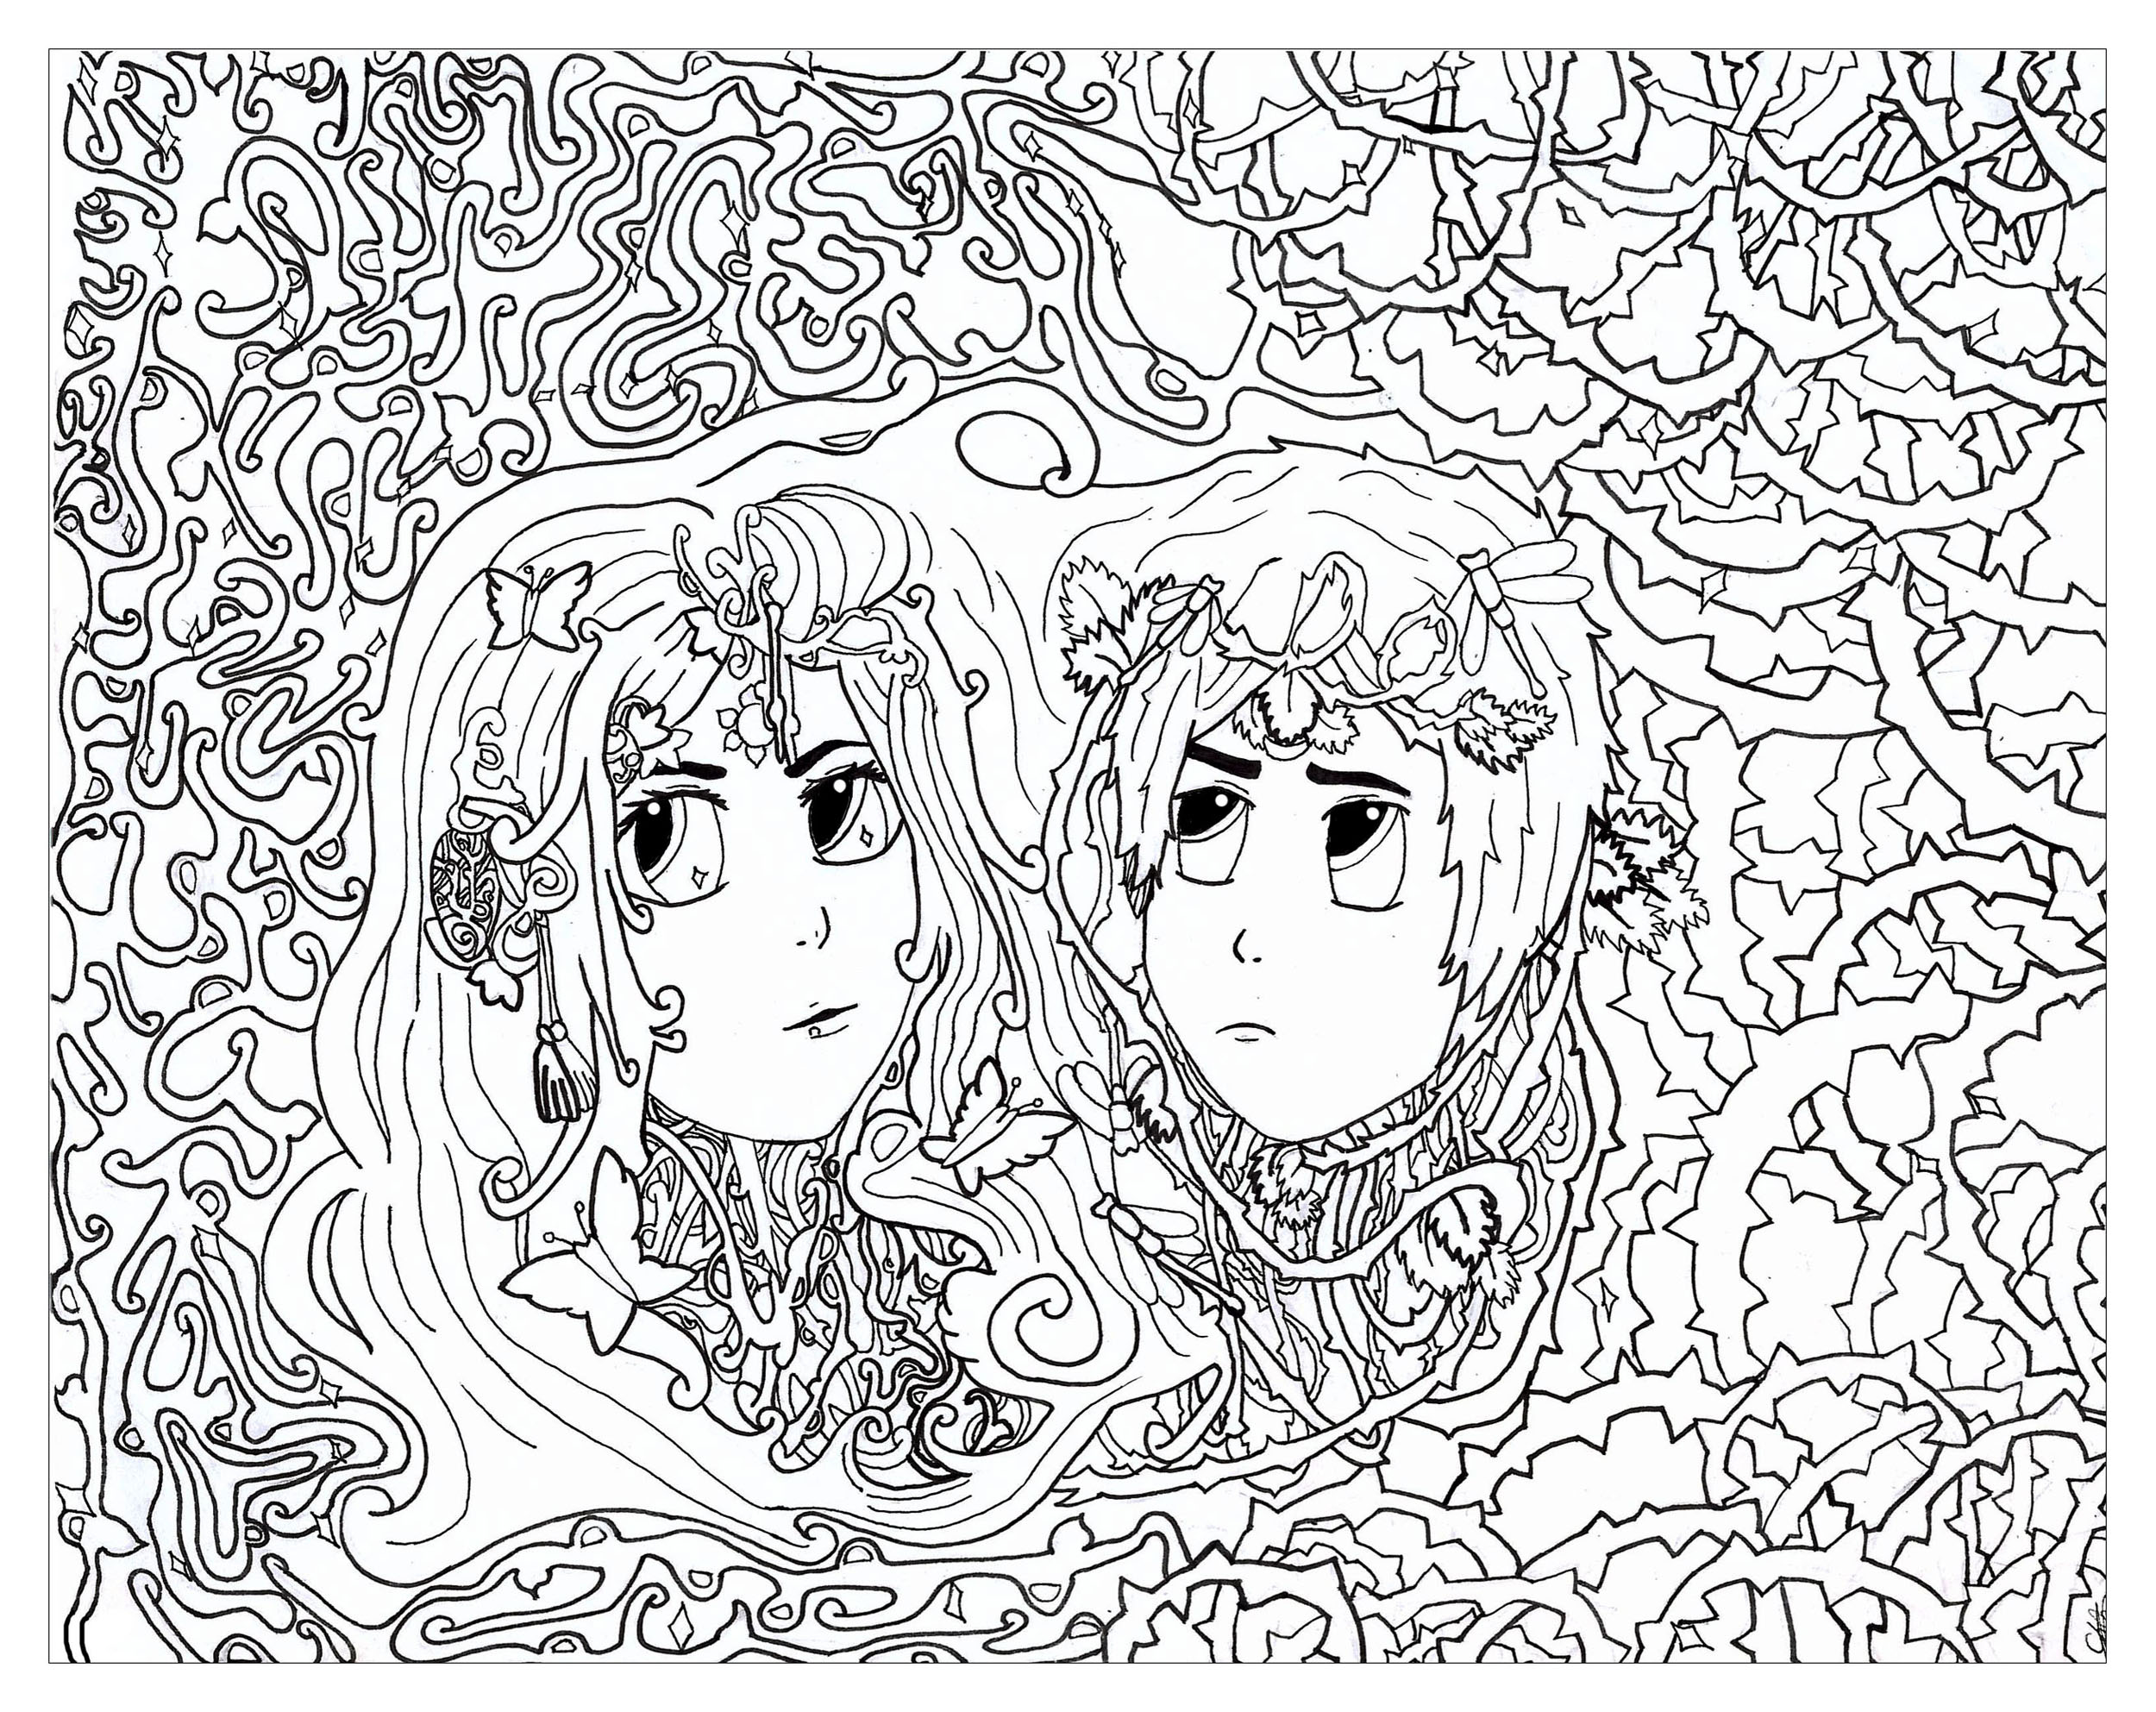 Coloring page inspired by The zodiac sign of Gemini.